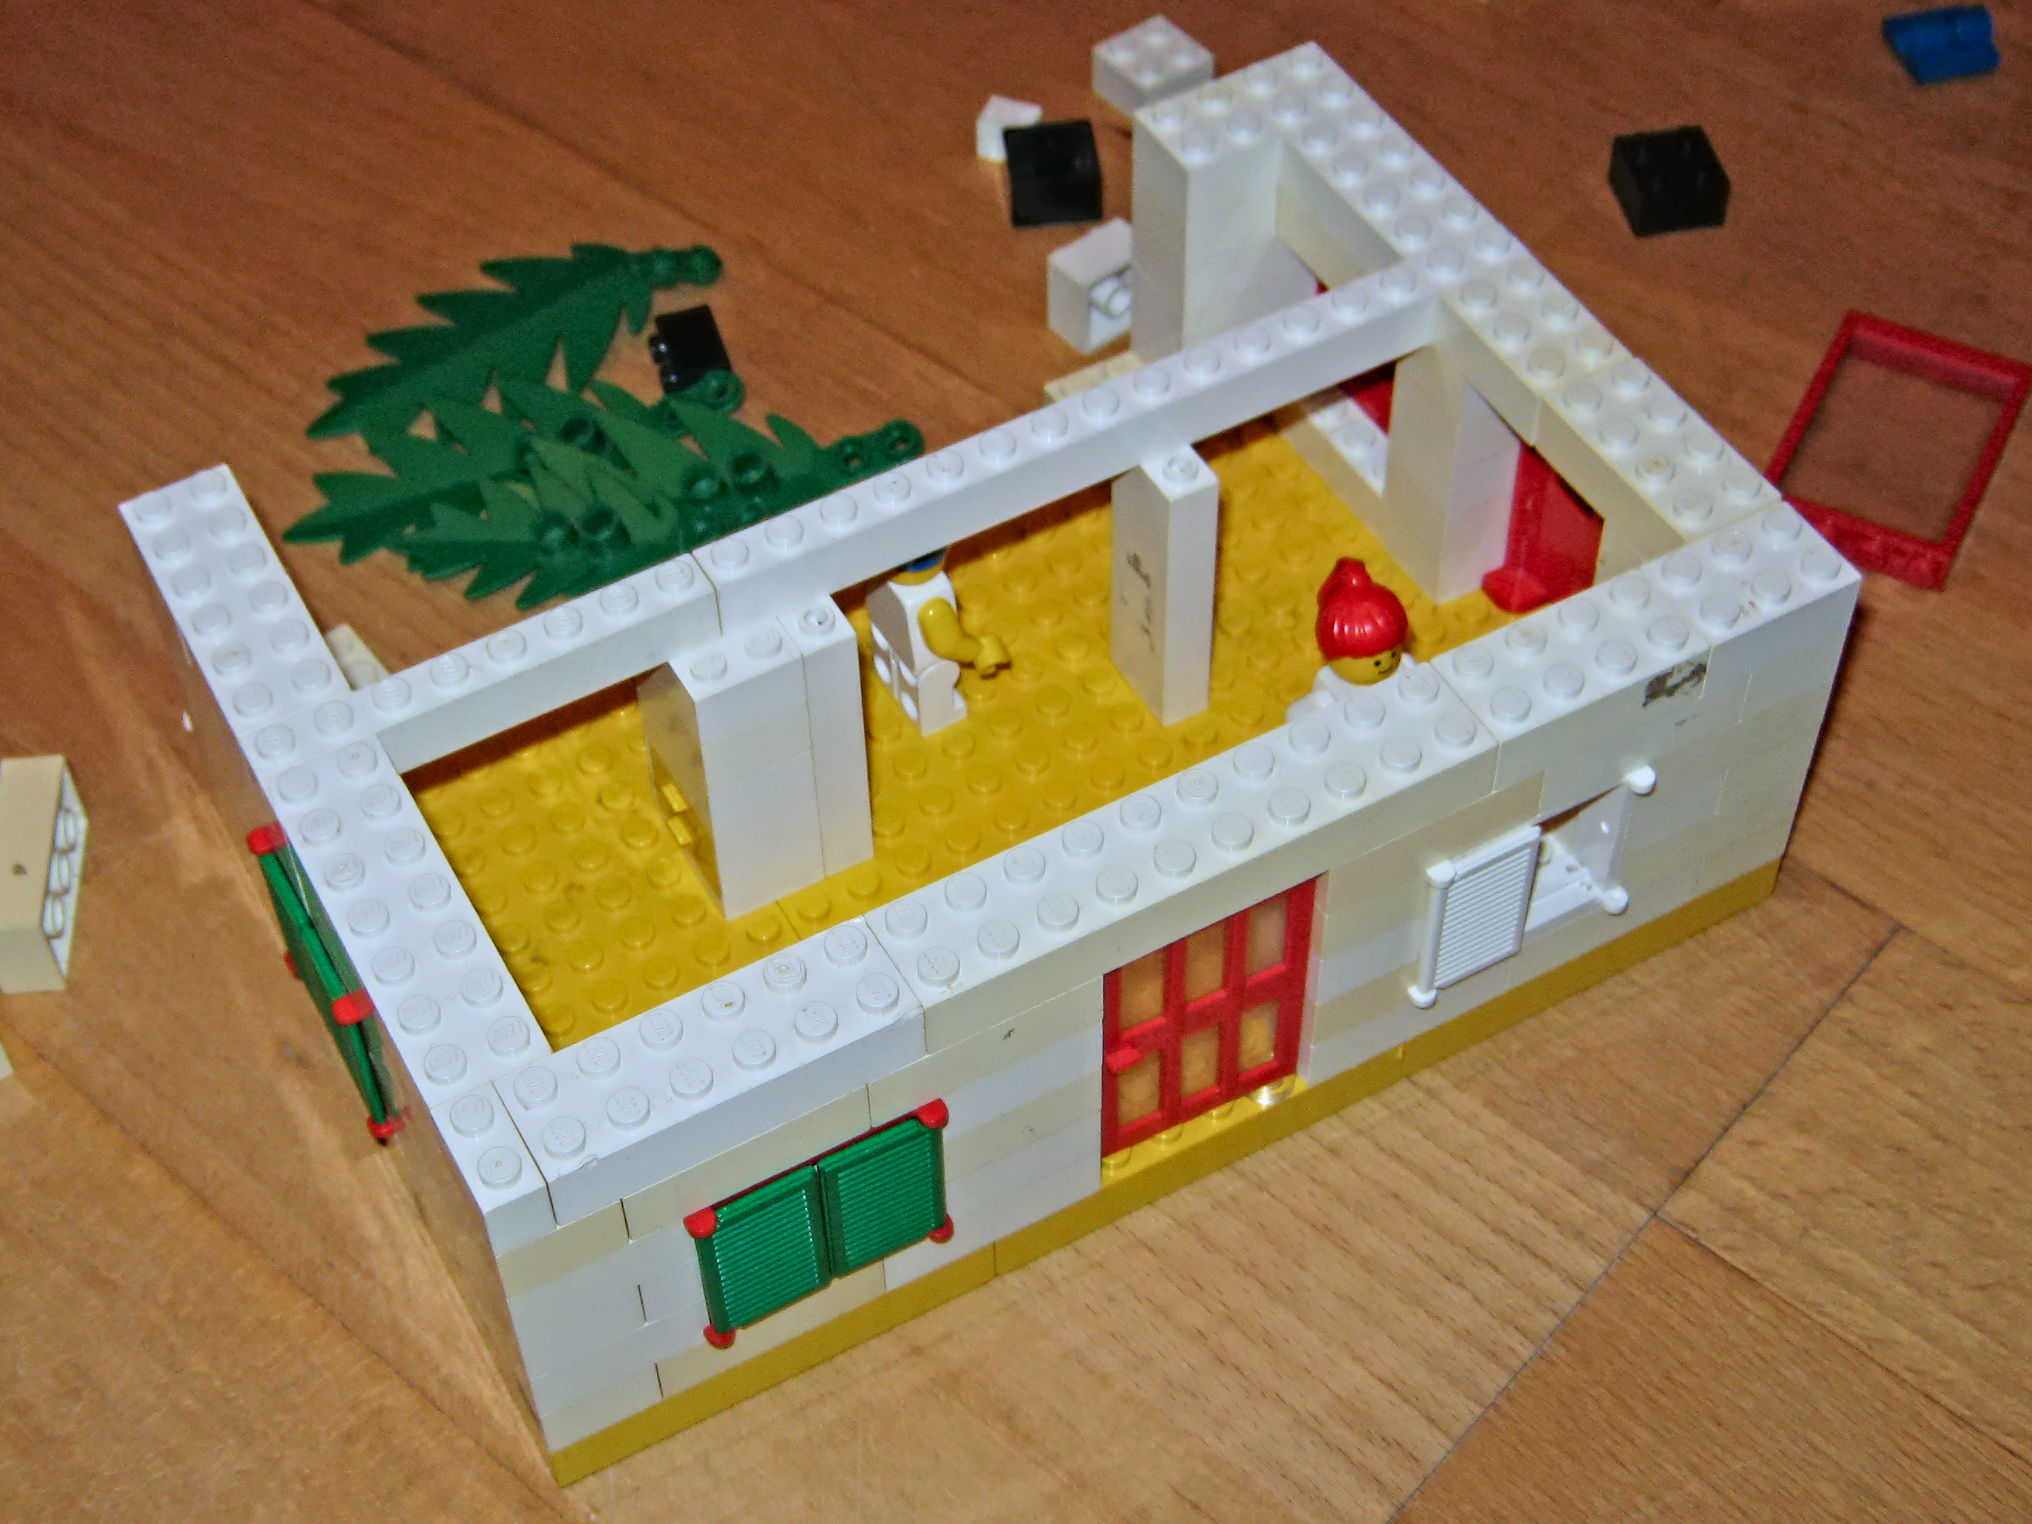 A house made of toy bricks. There are now solid walls, but no roof yet.